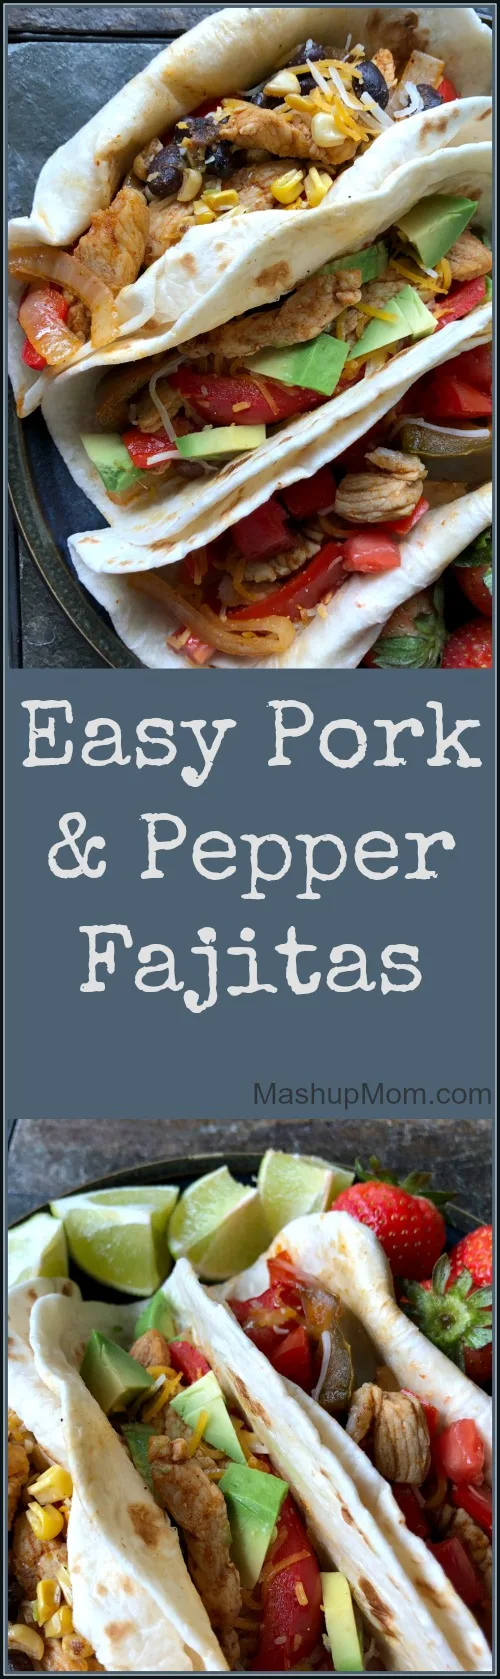 pork fajitas with bell peppers